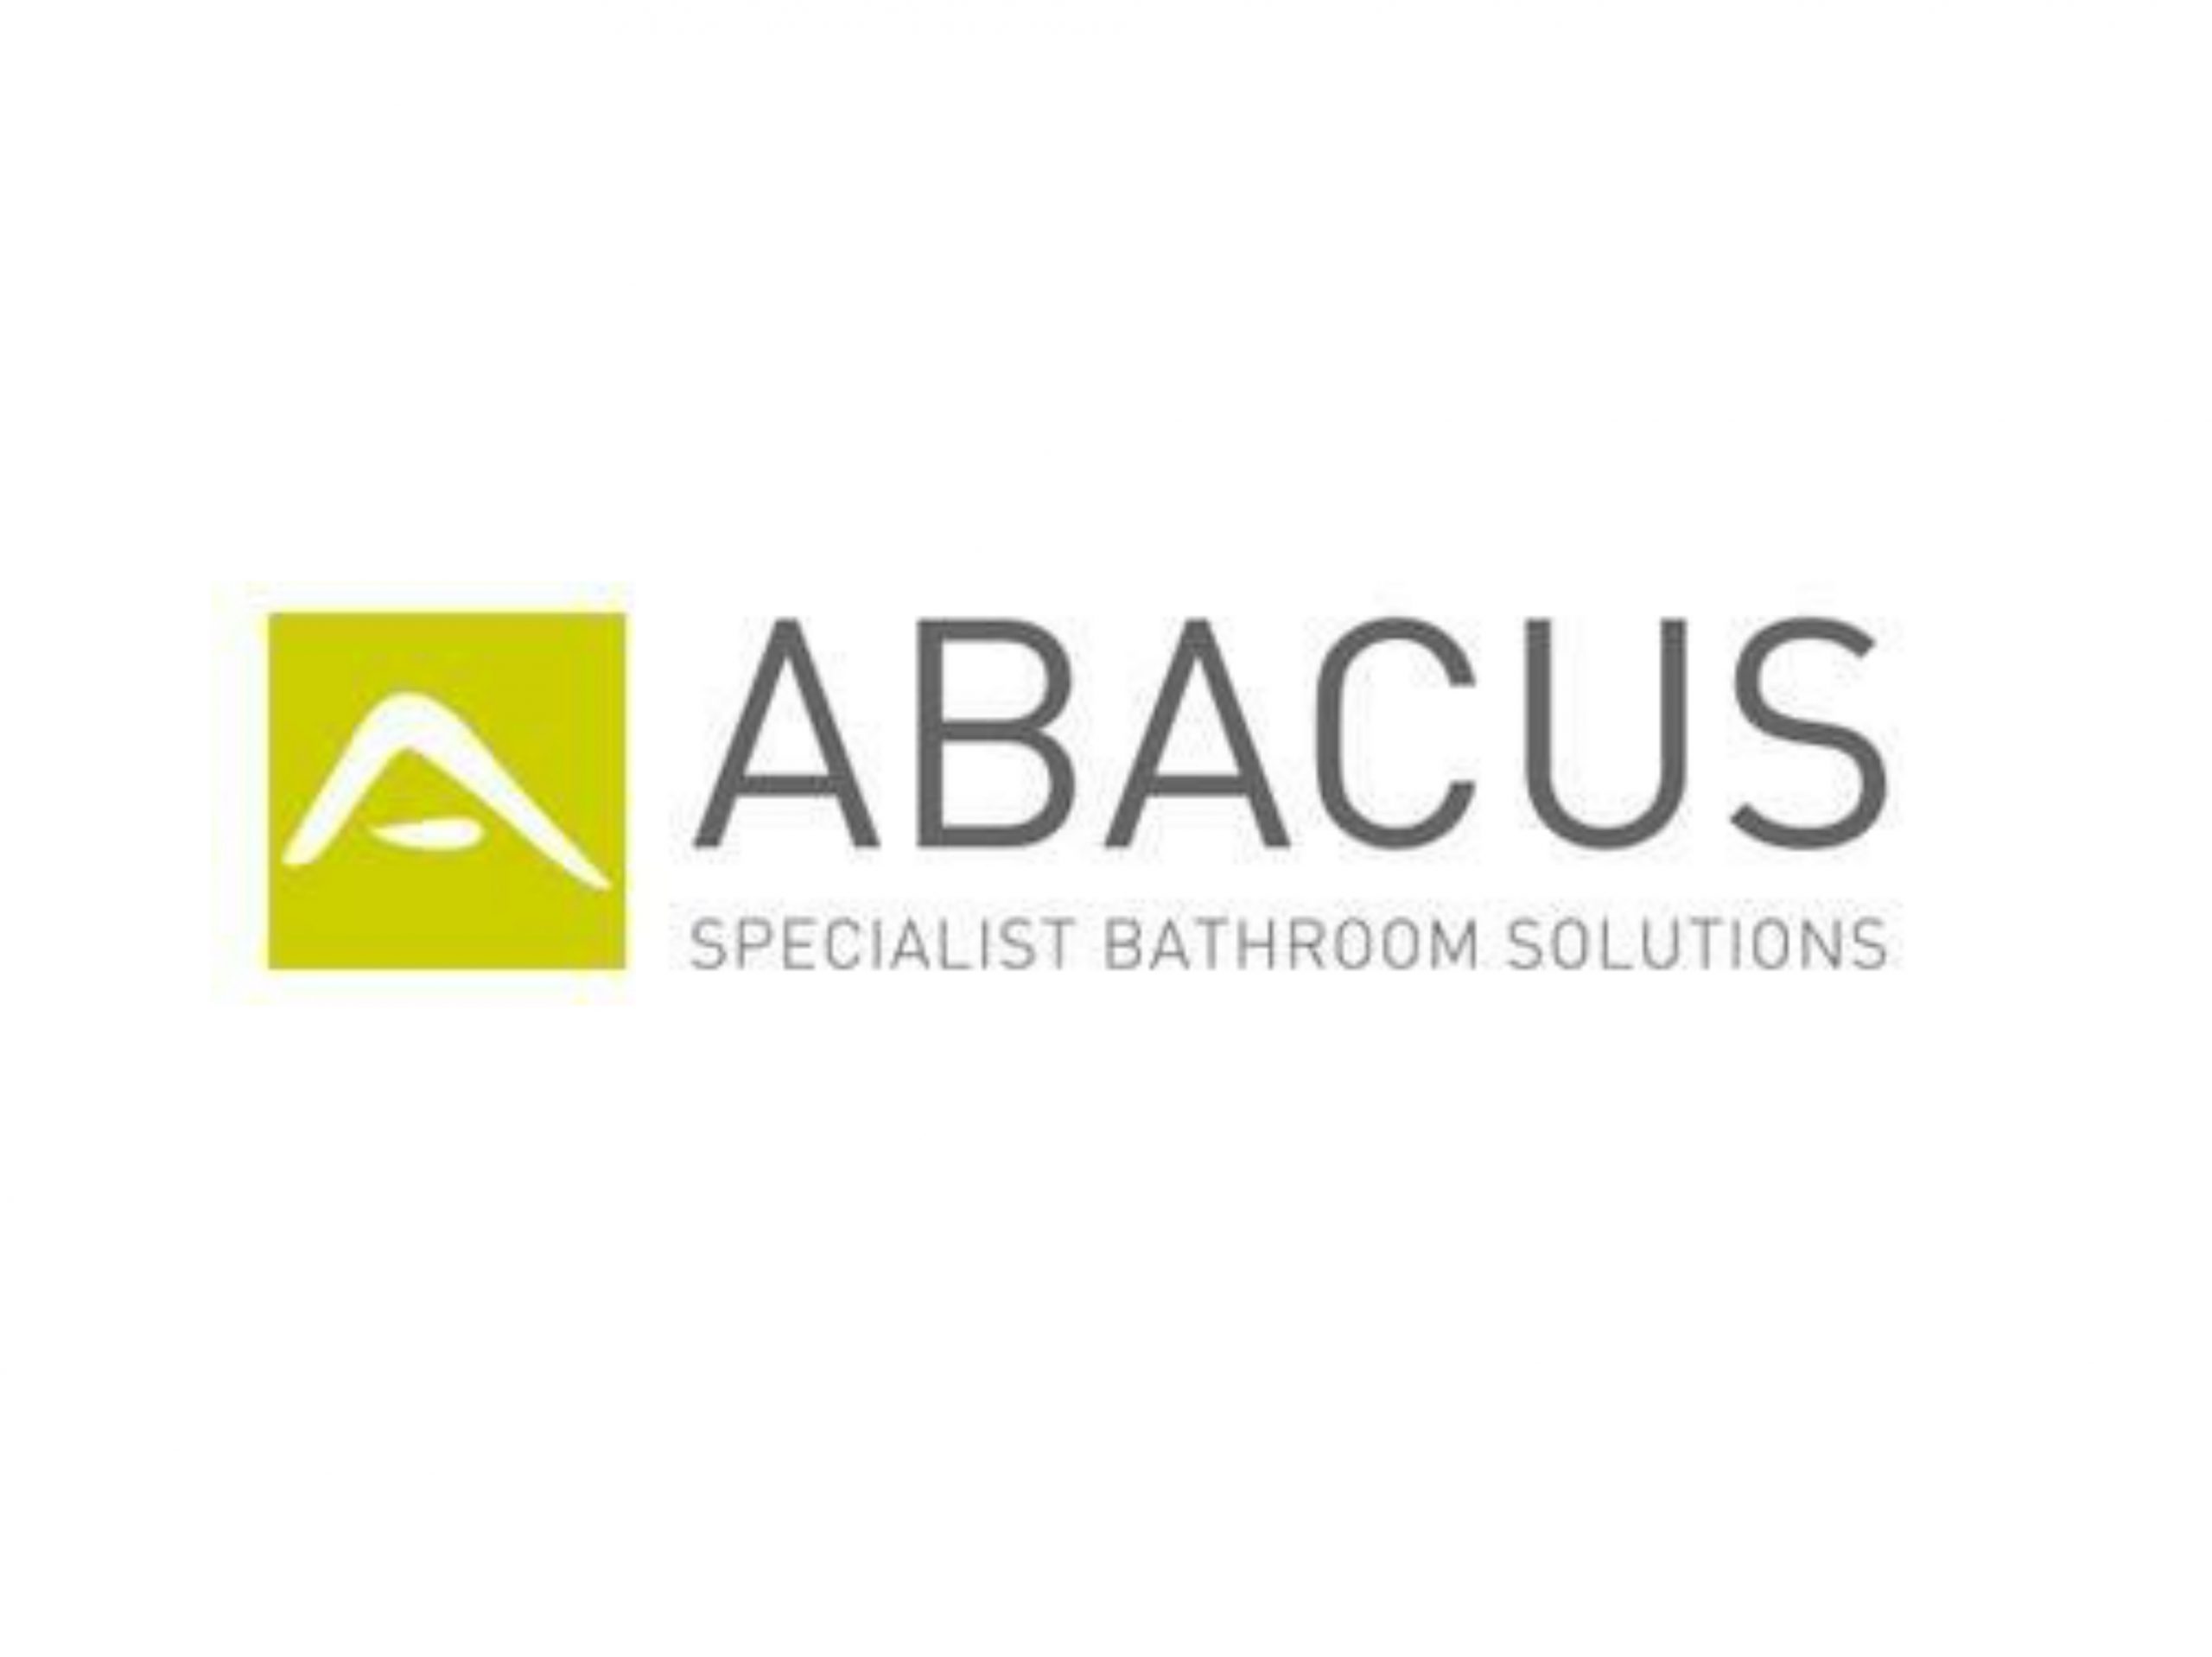 Abacus and Homecare Innovation defy Covid challenges to install baths at pioneering Dutch accessible holiday apartments